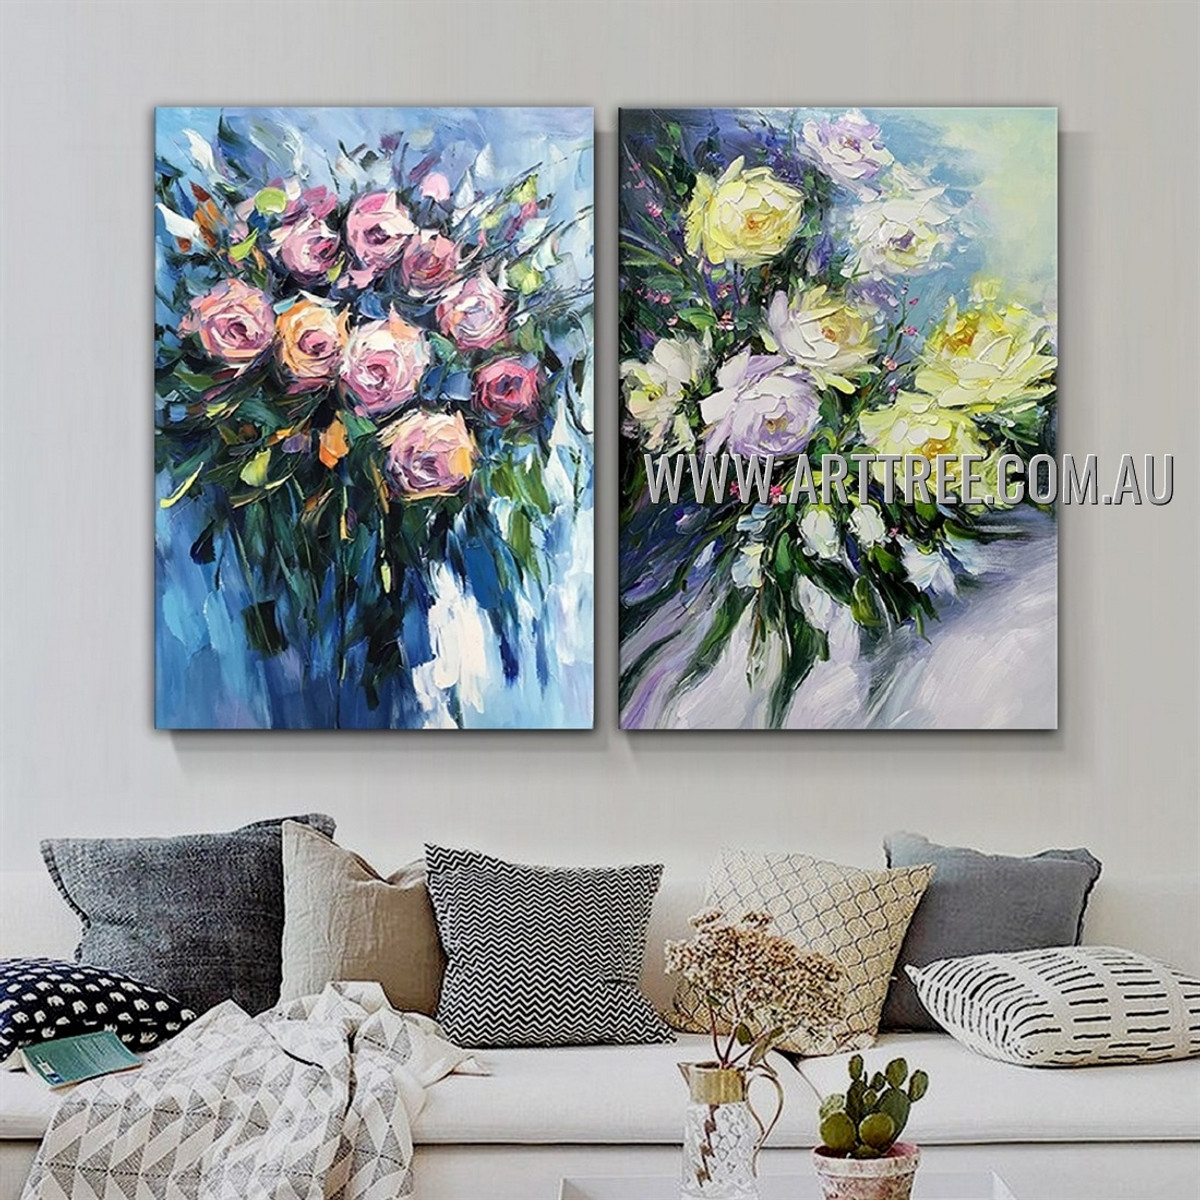 Varicolored Flowers Floral Abstract Modern Heavy Texture Artist Handmade 2 Piece Multi Panel Wall Art Canvas Painting for Room Decoration